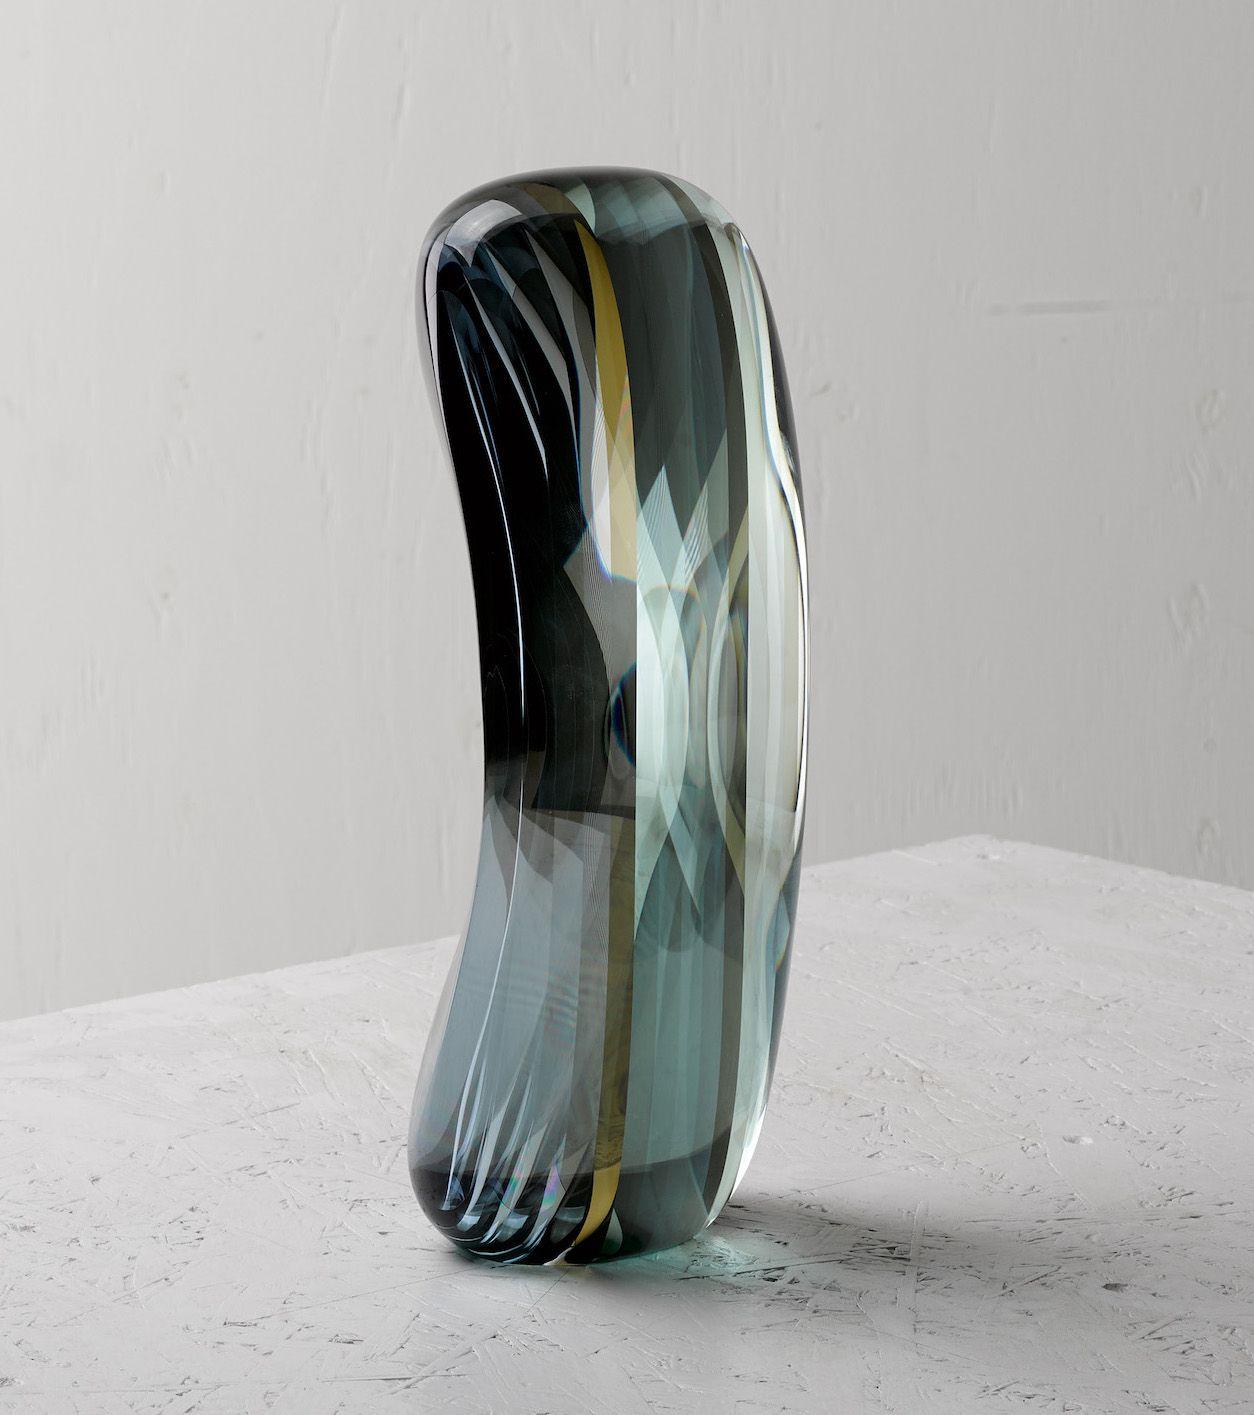 Heat reflecting glass and half mirror, 29 cm × 12 cm × 8 cm. Limited edition of 8. Delivered with a certificate of authenticity signed by the artist. 
In the ‘Move’ series, which began in the 2000’s, the artist presents vertical sculptures standing